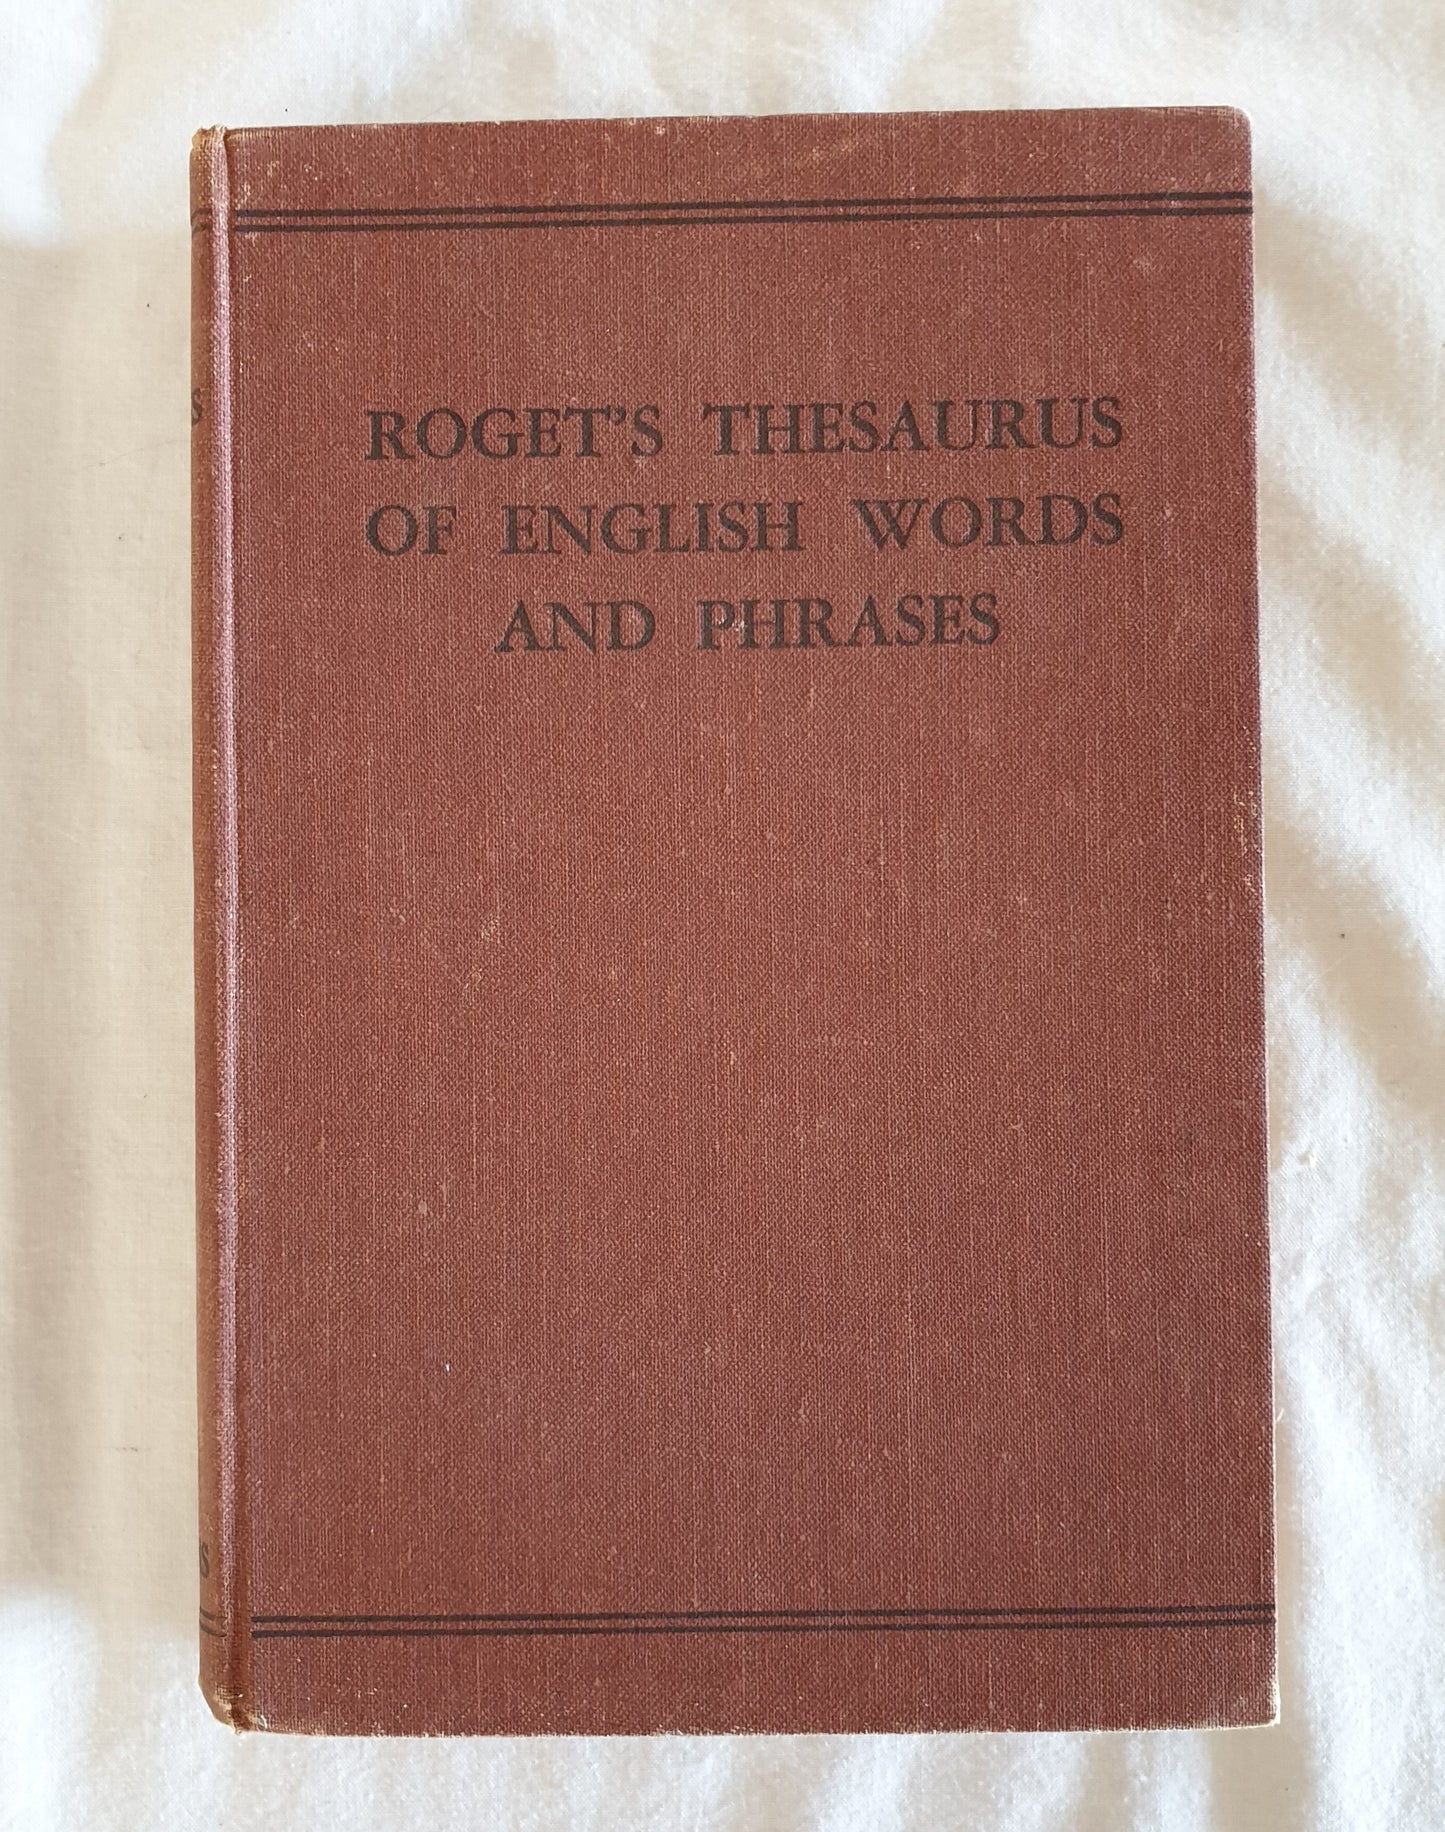 Roget's Thesaurus of English Words and Phrases by Peter Mark Roget